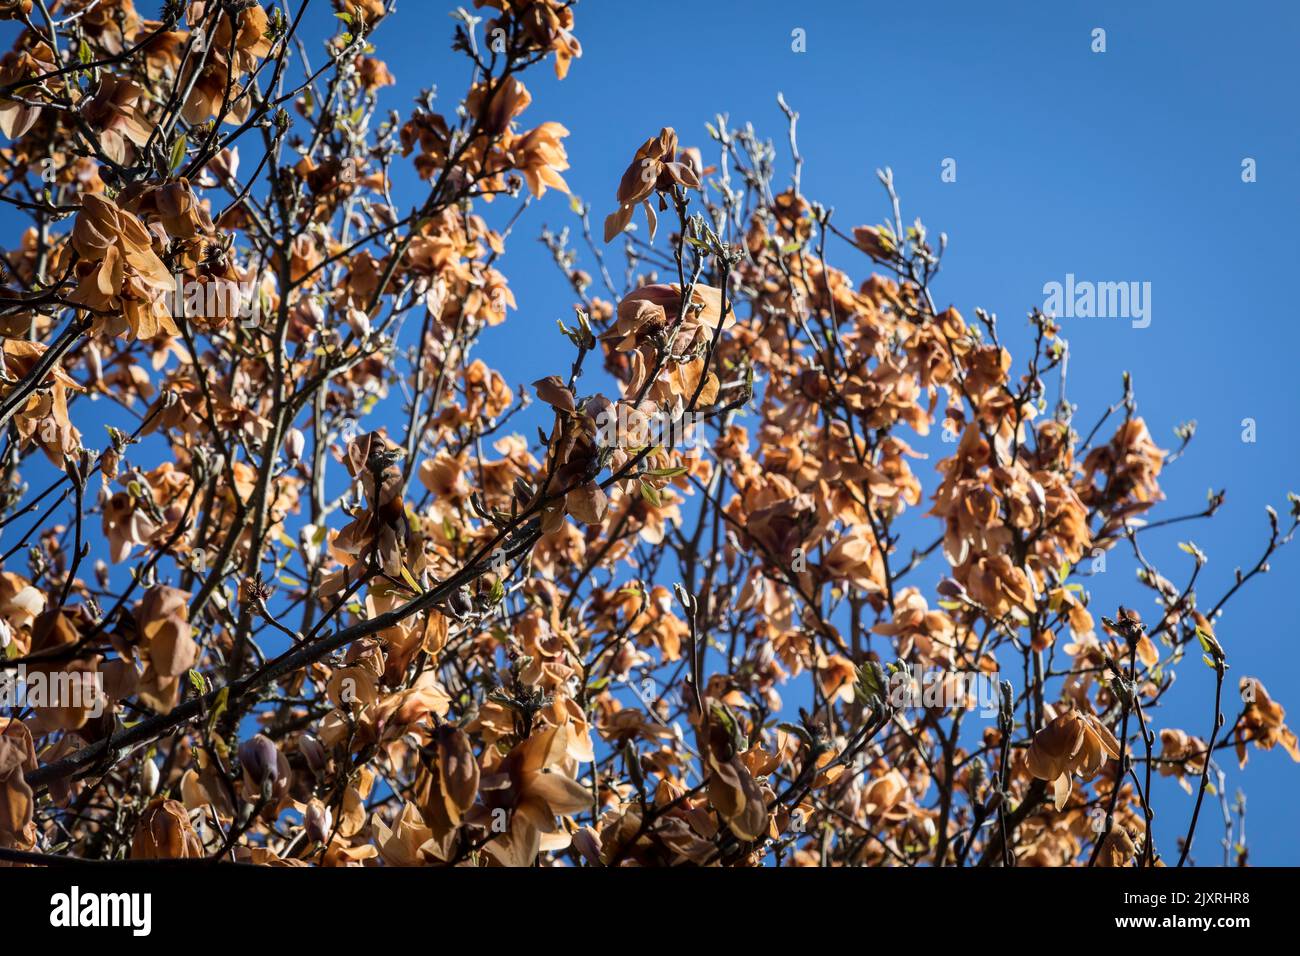 Magnolia blossum turned brown by a late frost, contrasted against a blue sky in a Surrey garden, England. Stock Photo